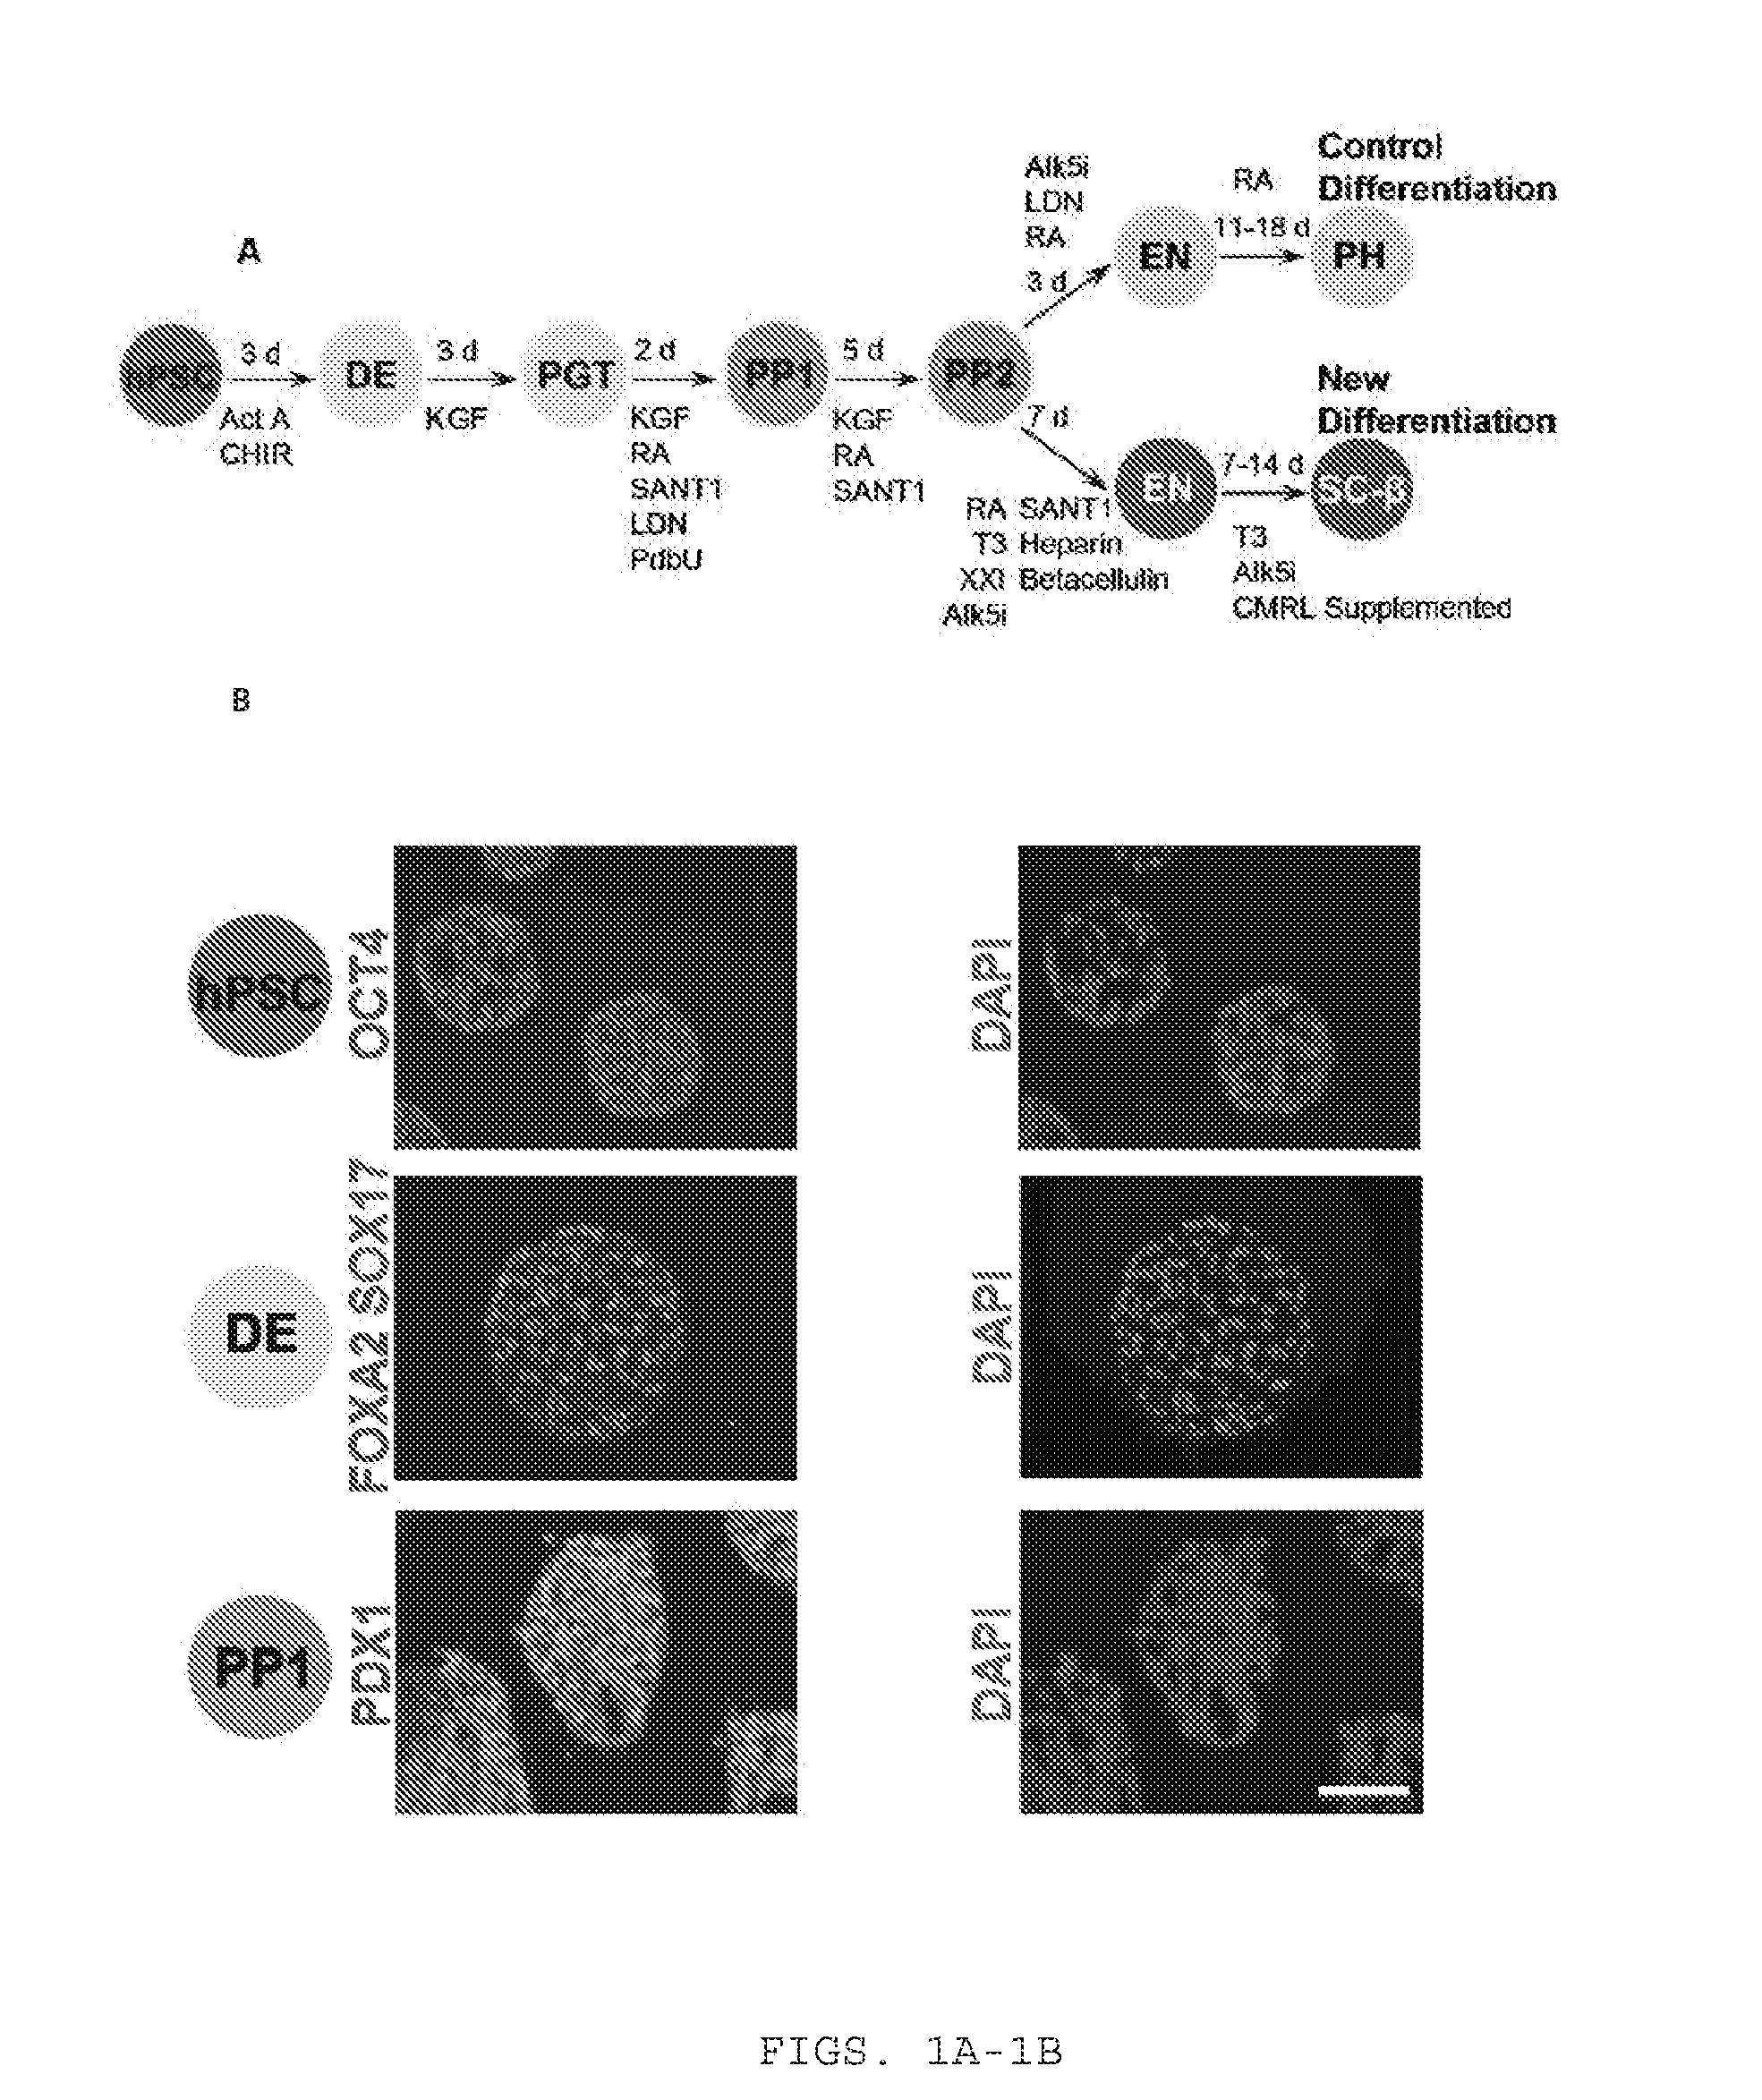 Sc-beta cells and compositions and methods for generating the same